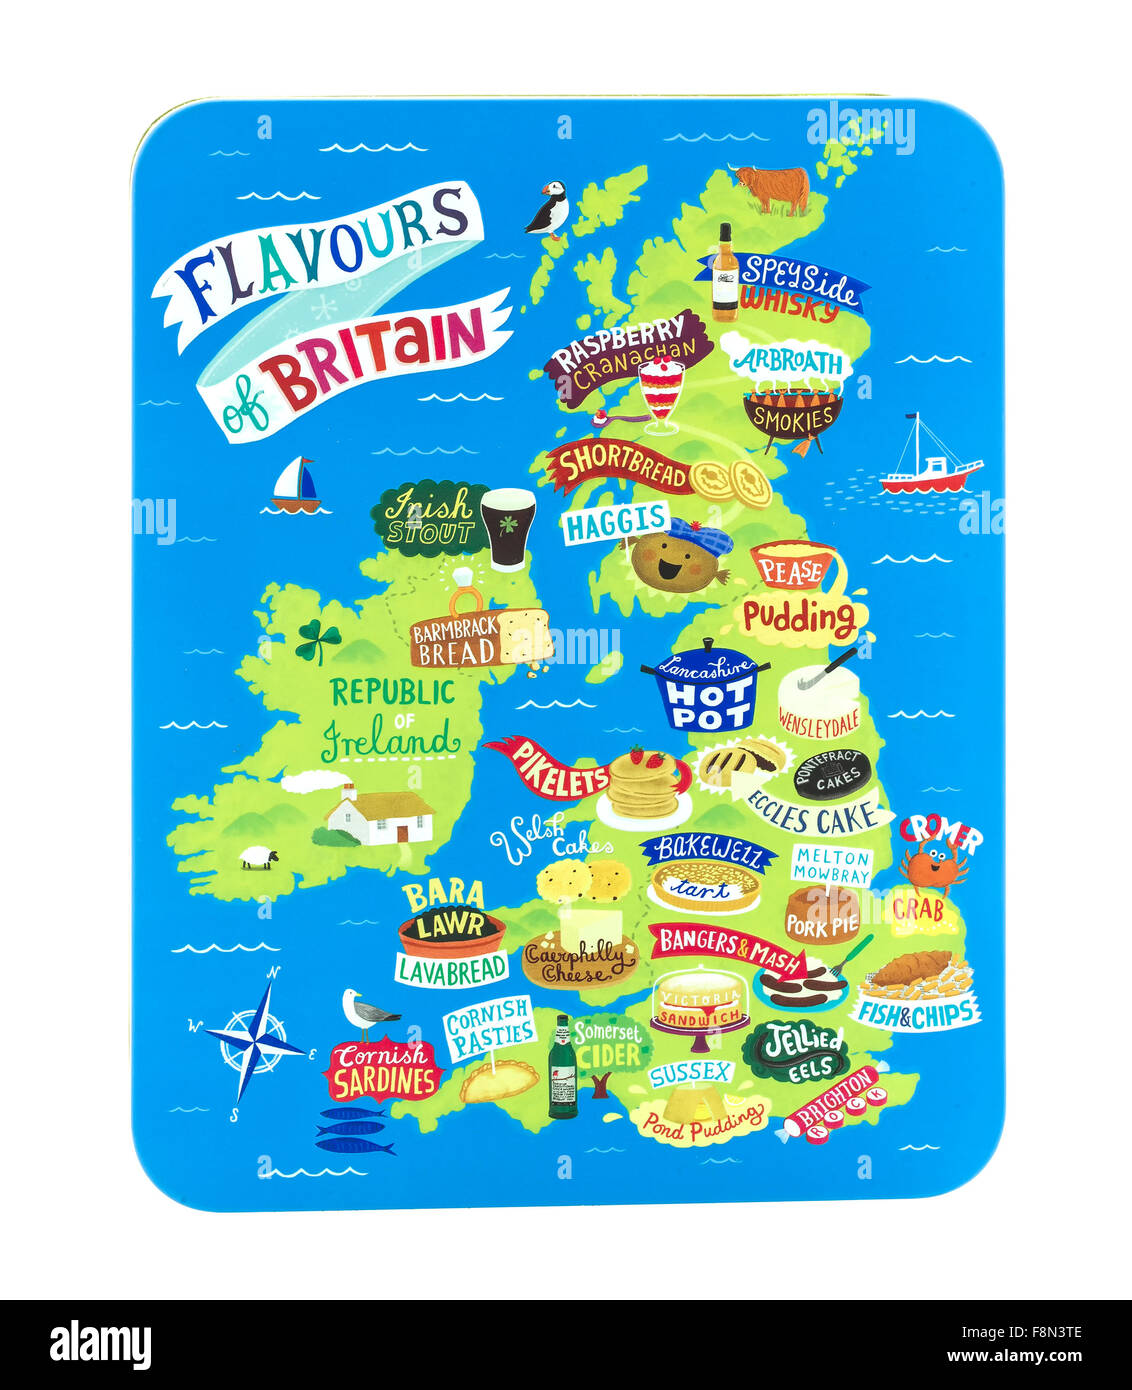 Marks and Spencer  Flavors of Britain Biscuit Tin on a White Background Stock Photo